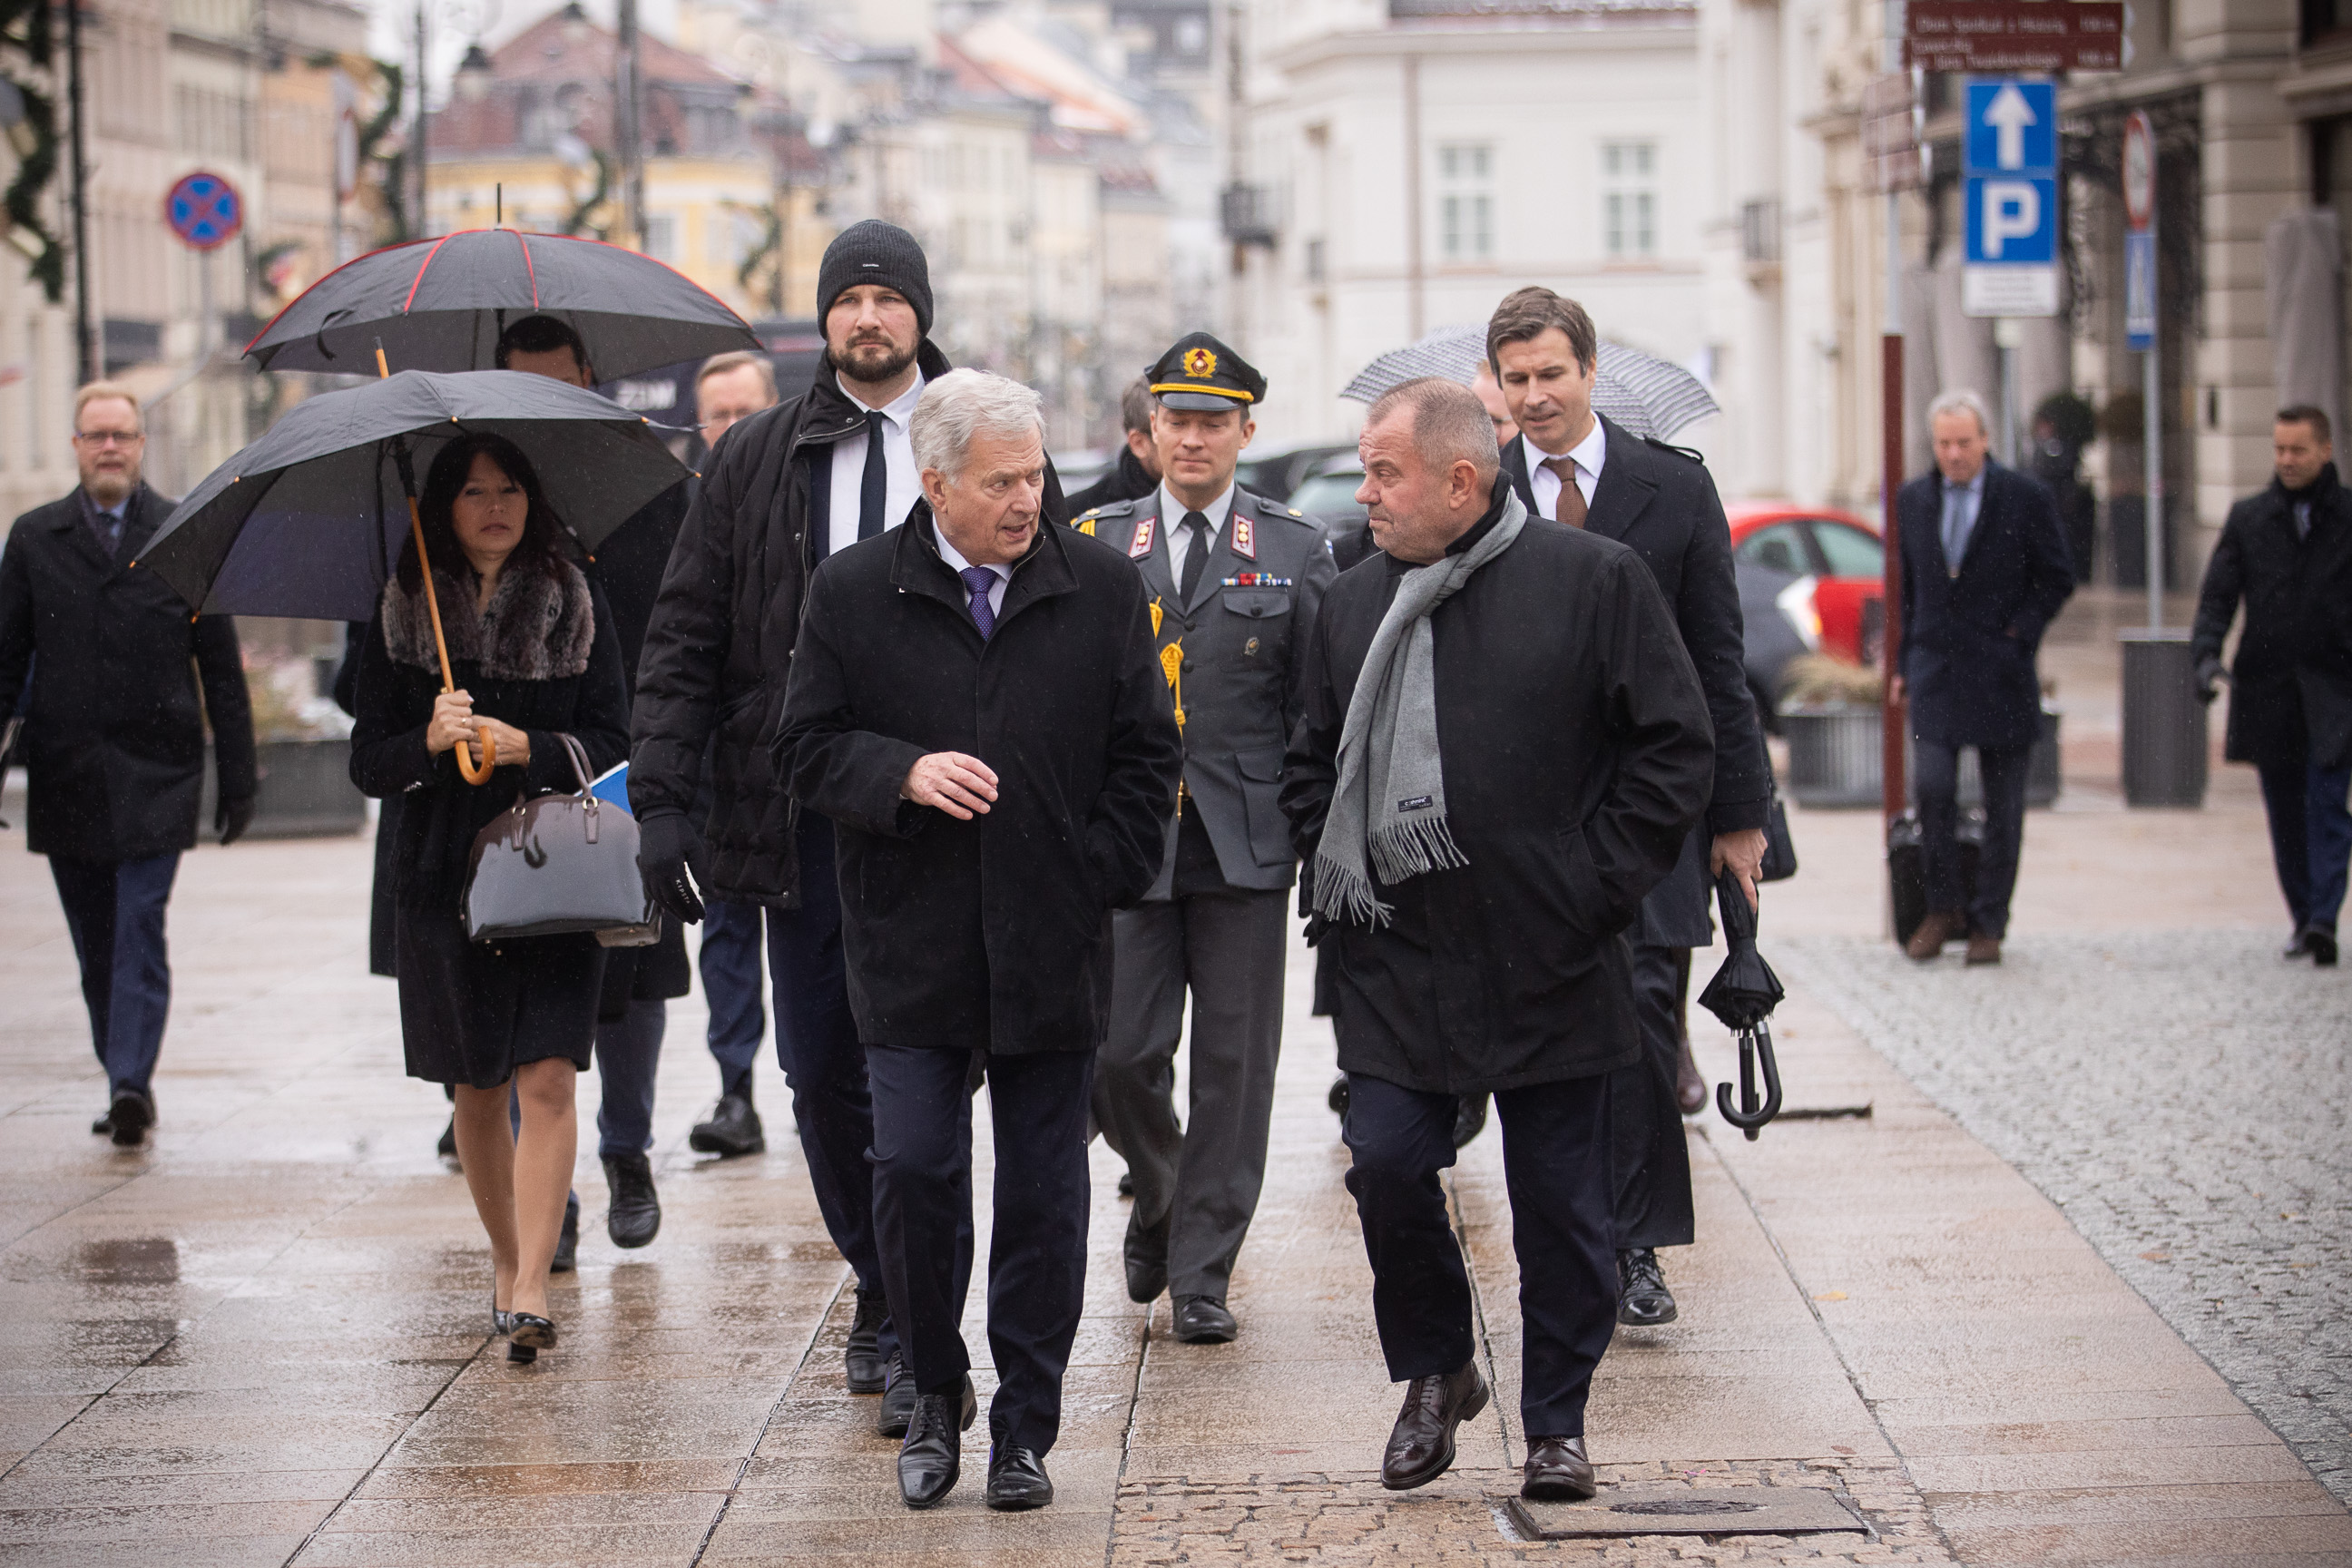 Rector of the University of Warsaw, Professor Alojzy Z. Nowak and President Sauli Niinistö walking to a debate with students at the University of Warsaw on 21 November 2023. Photo: Matti Porre/Office of the President of the Republic of Finland